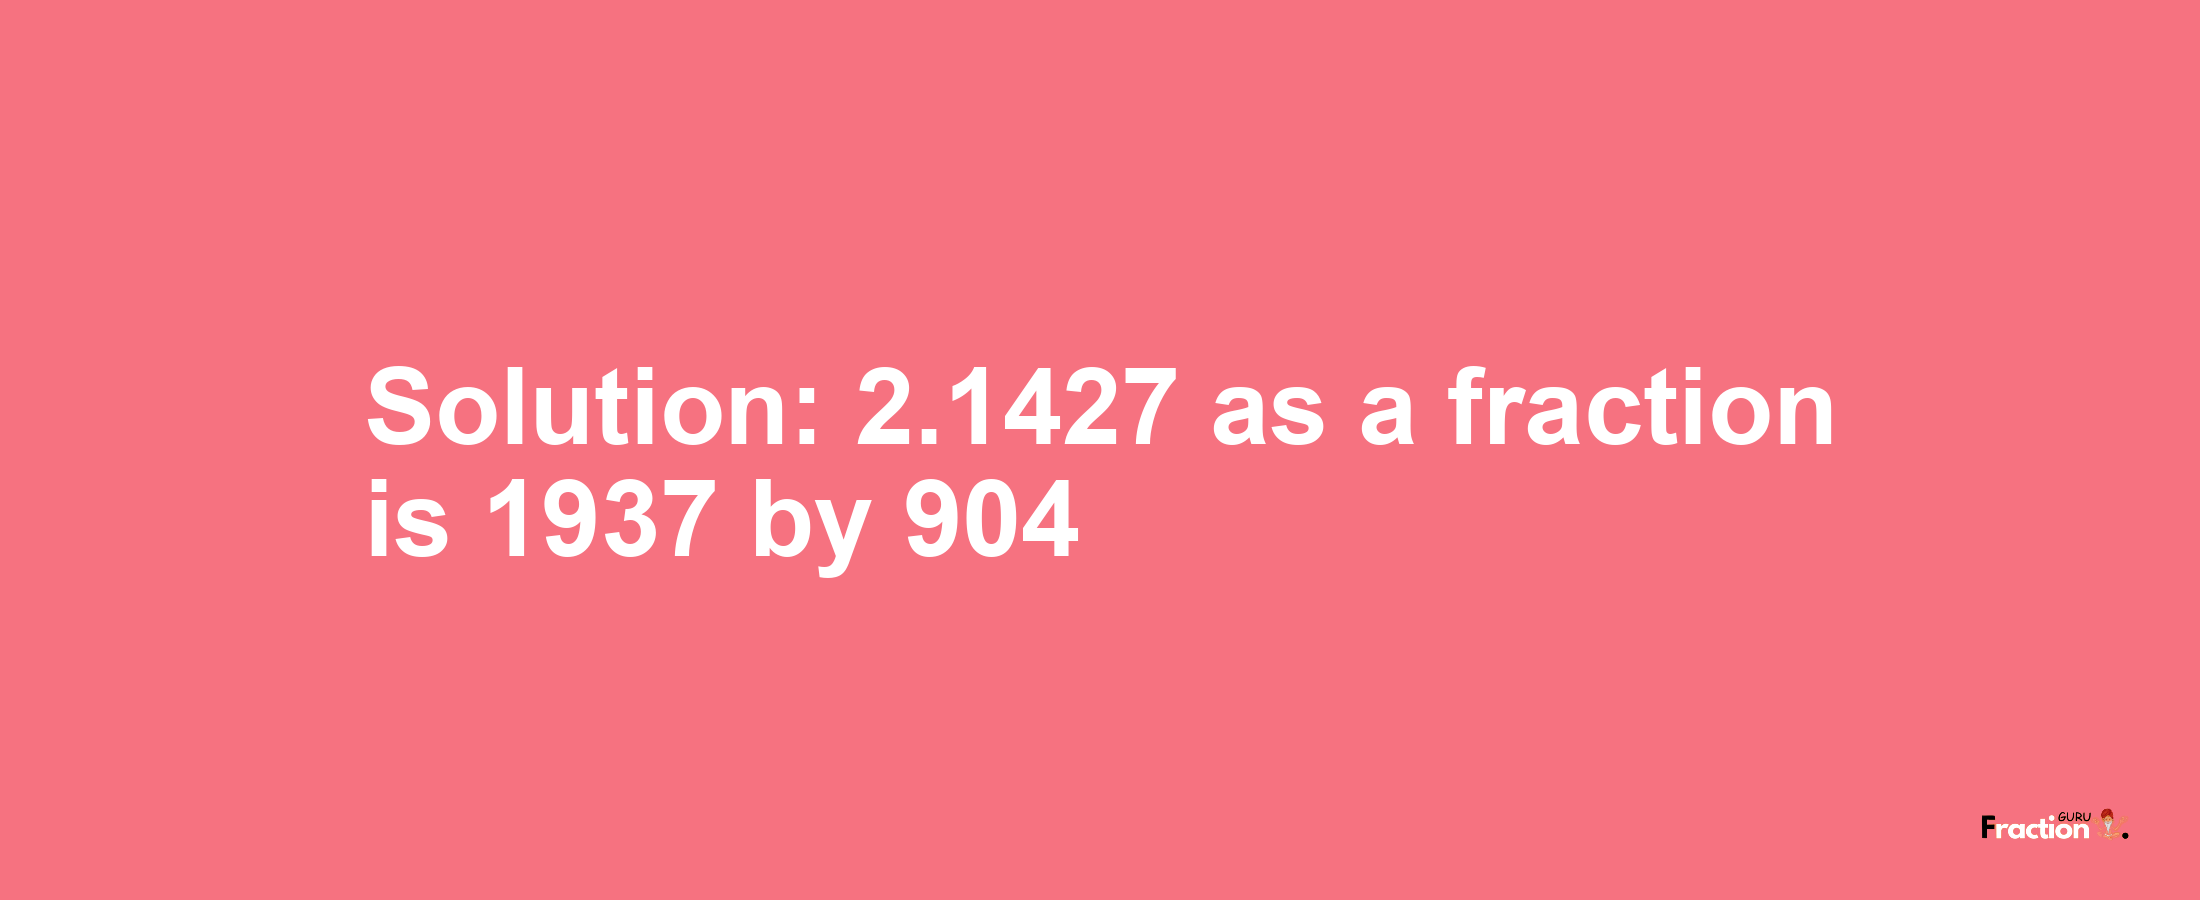 Solution:2.1427 as a fraction is 1937/904